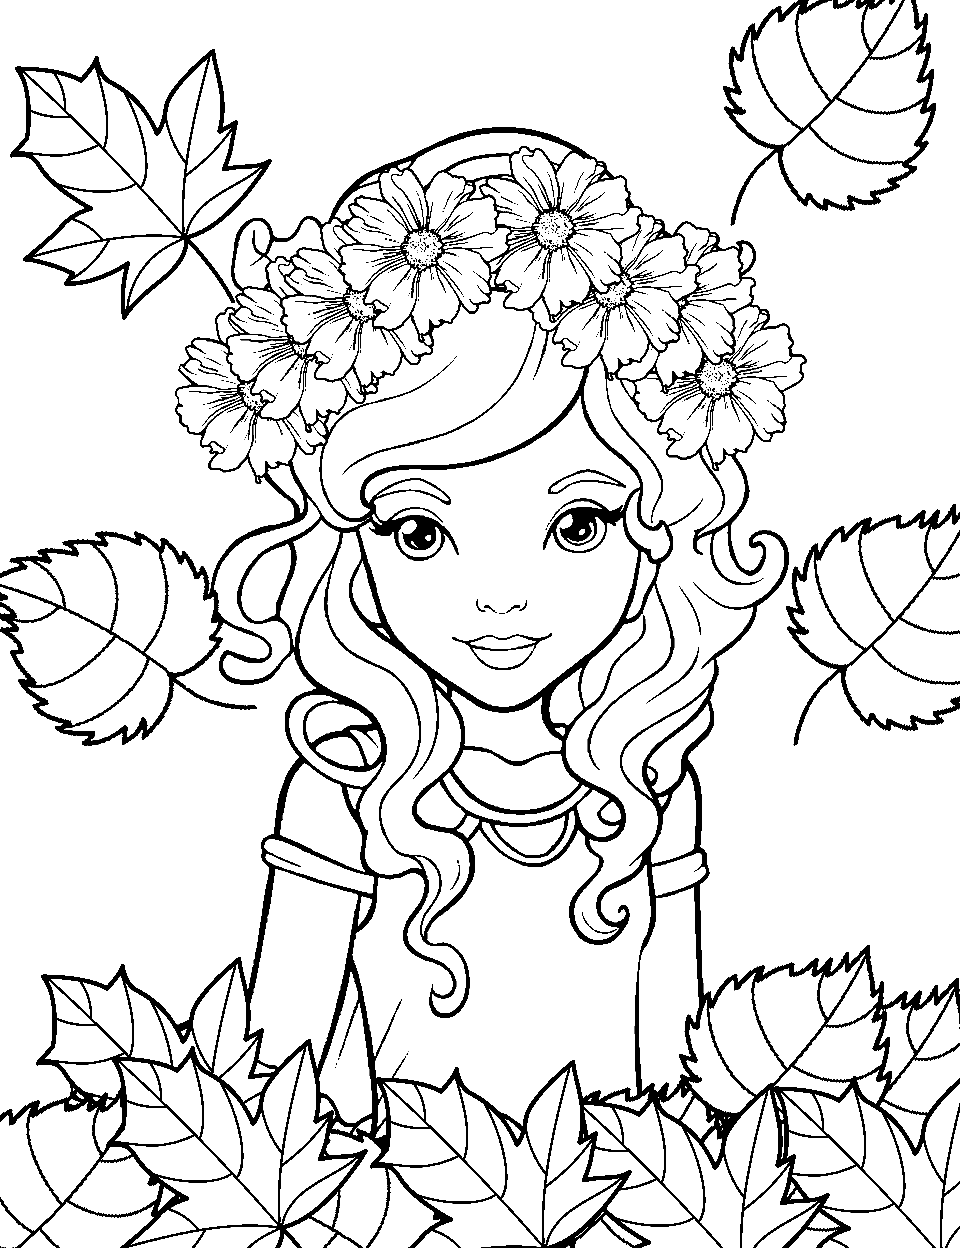 Autumn Elf with Falling Leaves Coloring Page - An elf surrounded by the colors of autumn leaves.